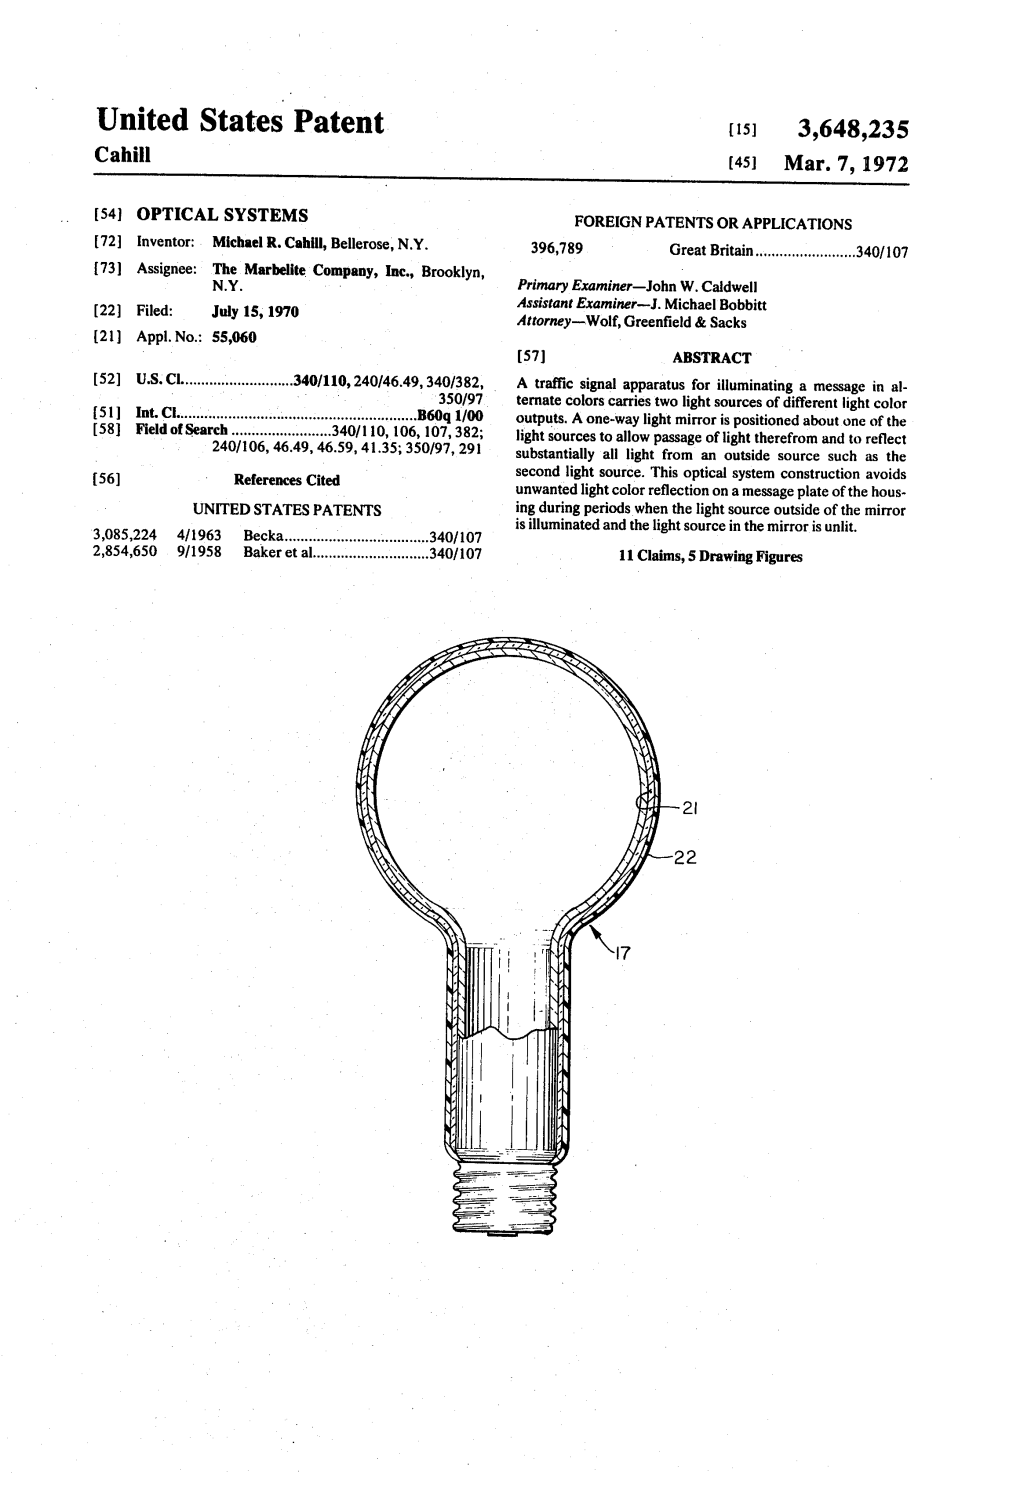 United States Patent [151 3,648,235 Cahill [45] Mar